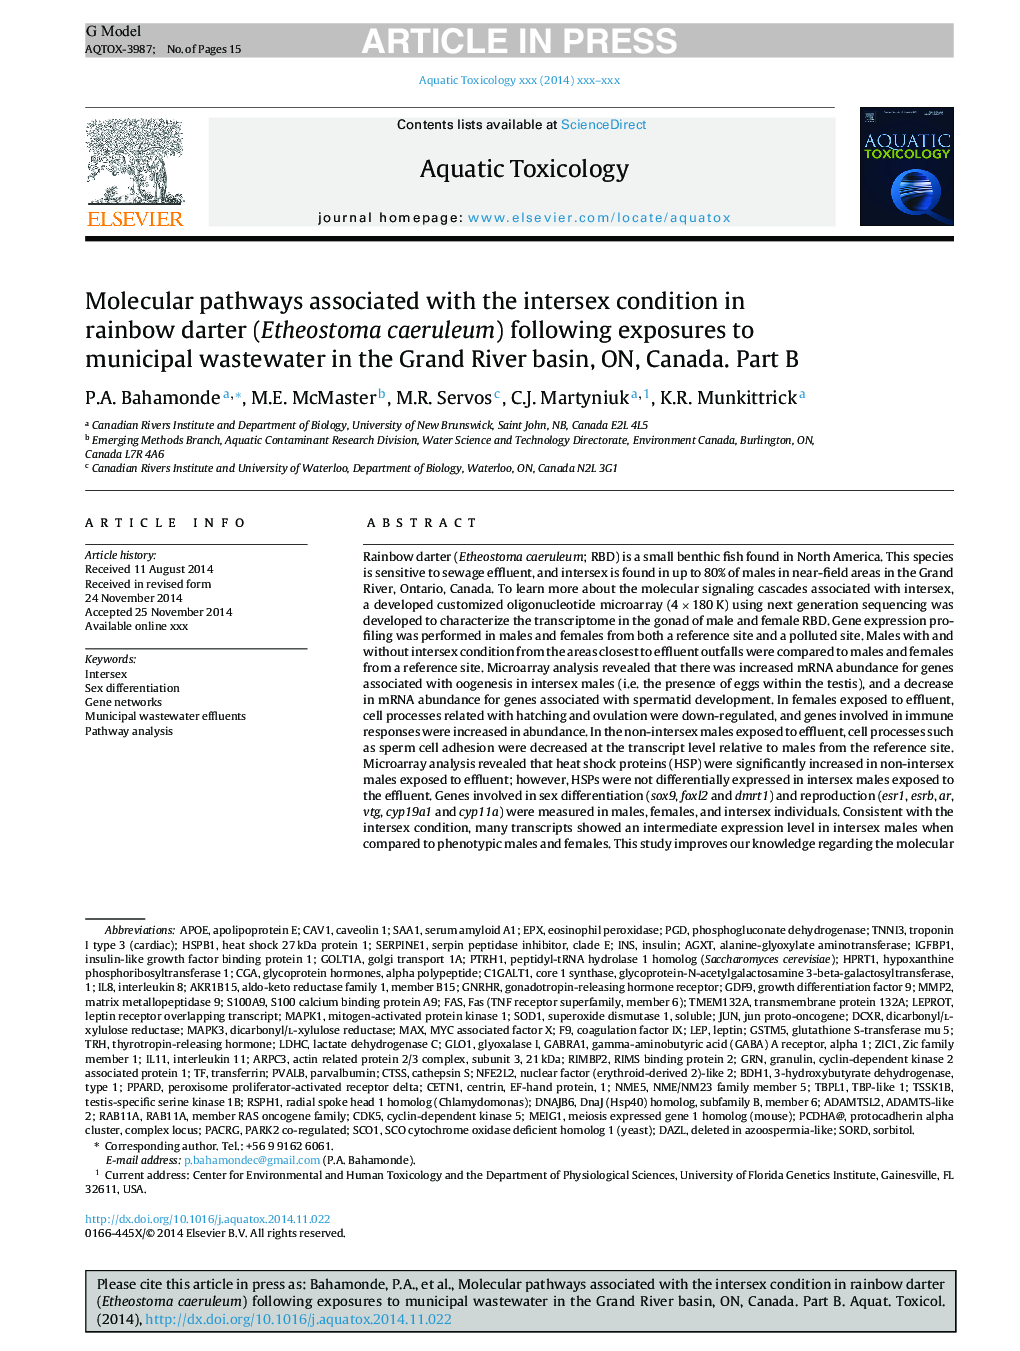 Molecular pathways associated with the intersex condition in rainbow darter (Etheostoma caeruleum) following exposures to municipal wastewater in the Grand River basin, ON, Canada. Part B